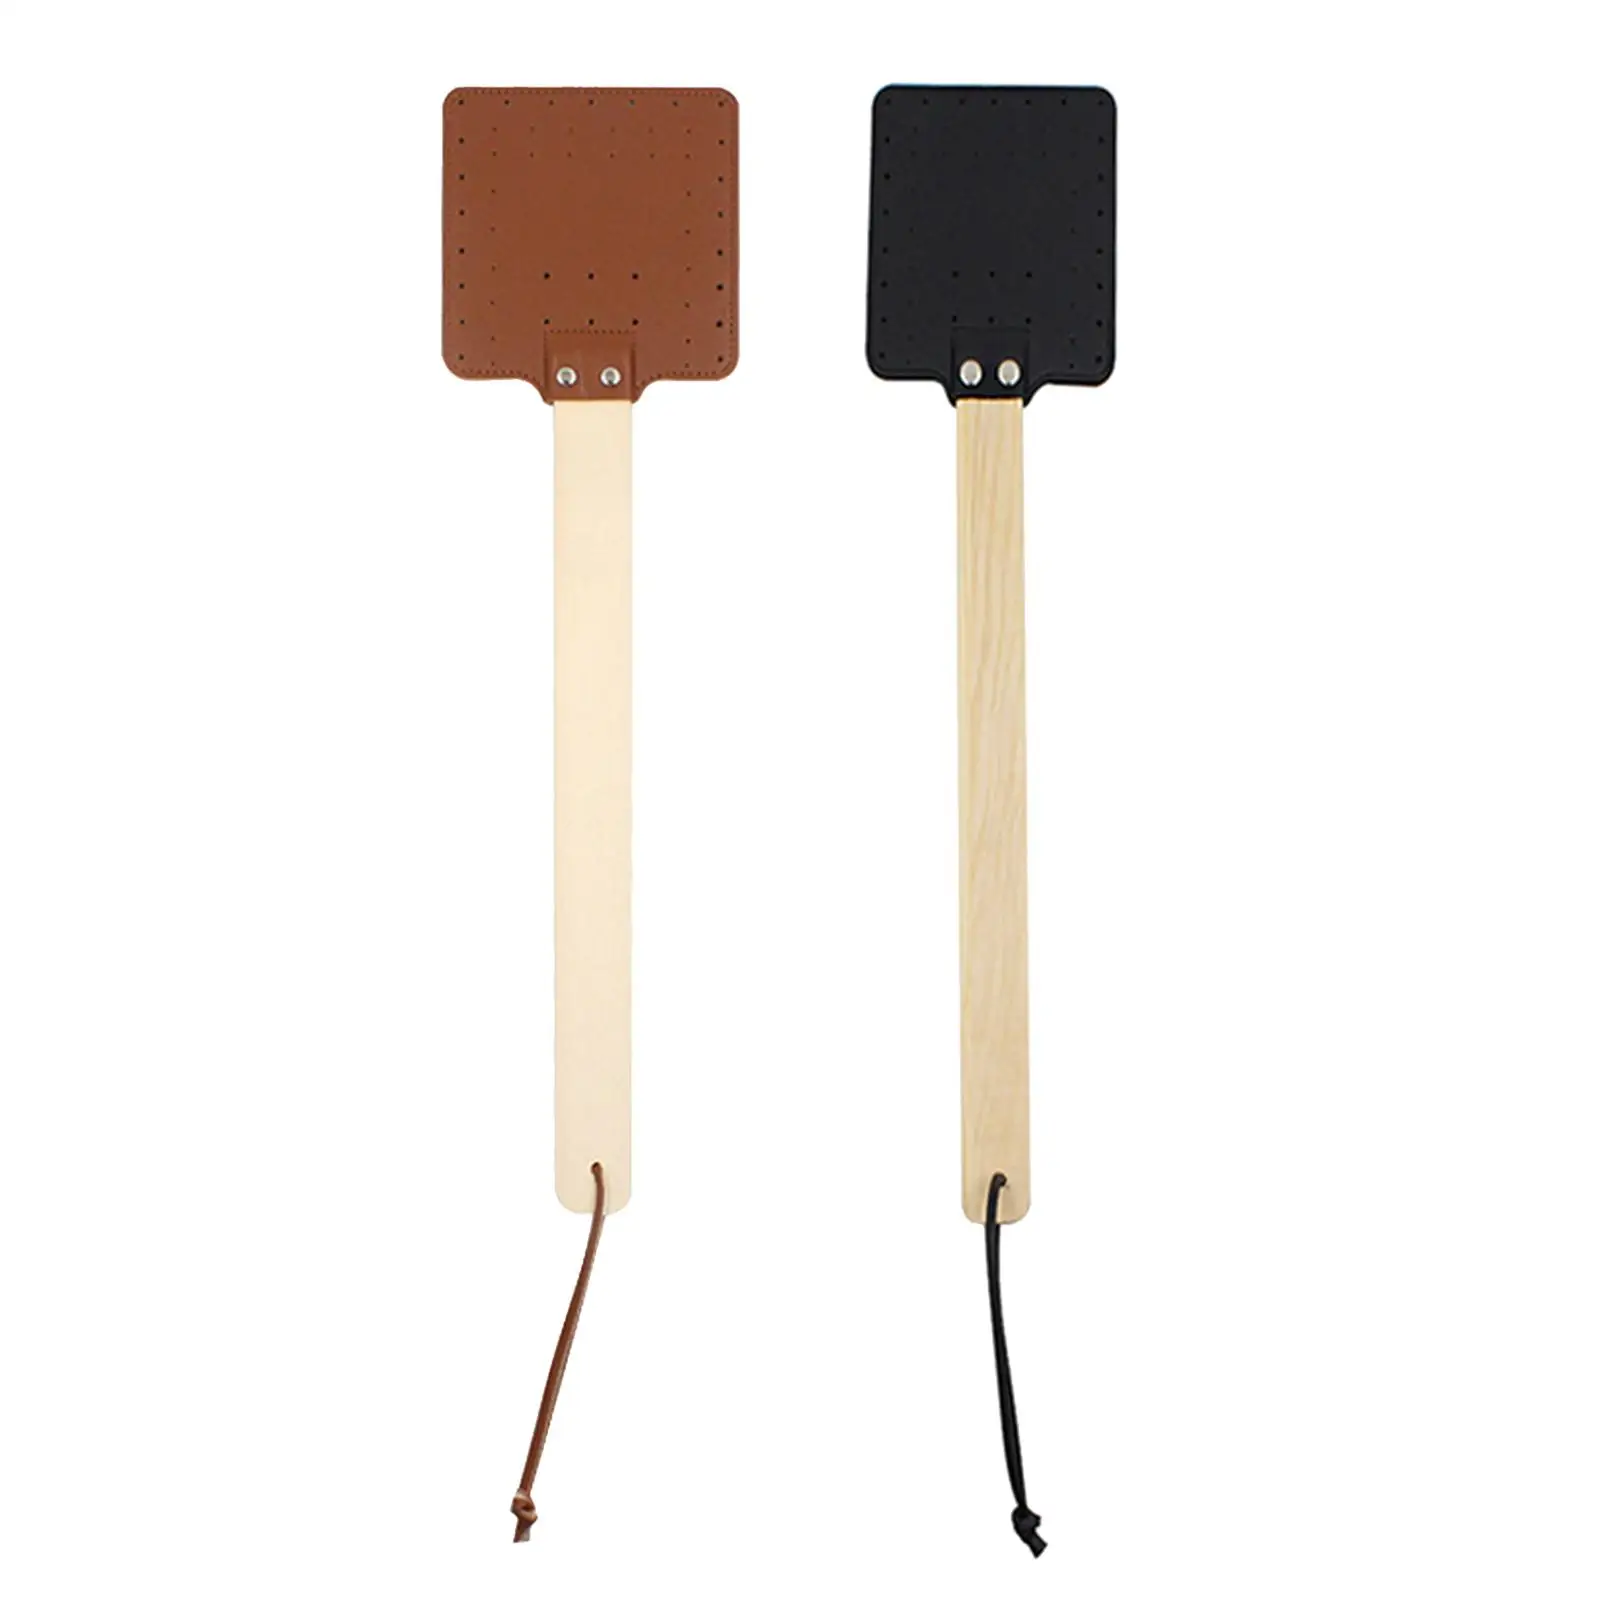 PU Leather Manual Fly Swatter Wooden Handle Outdoor Household Indoor